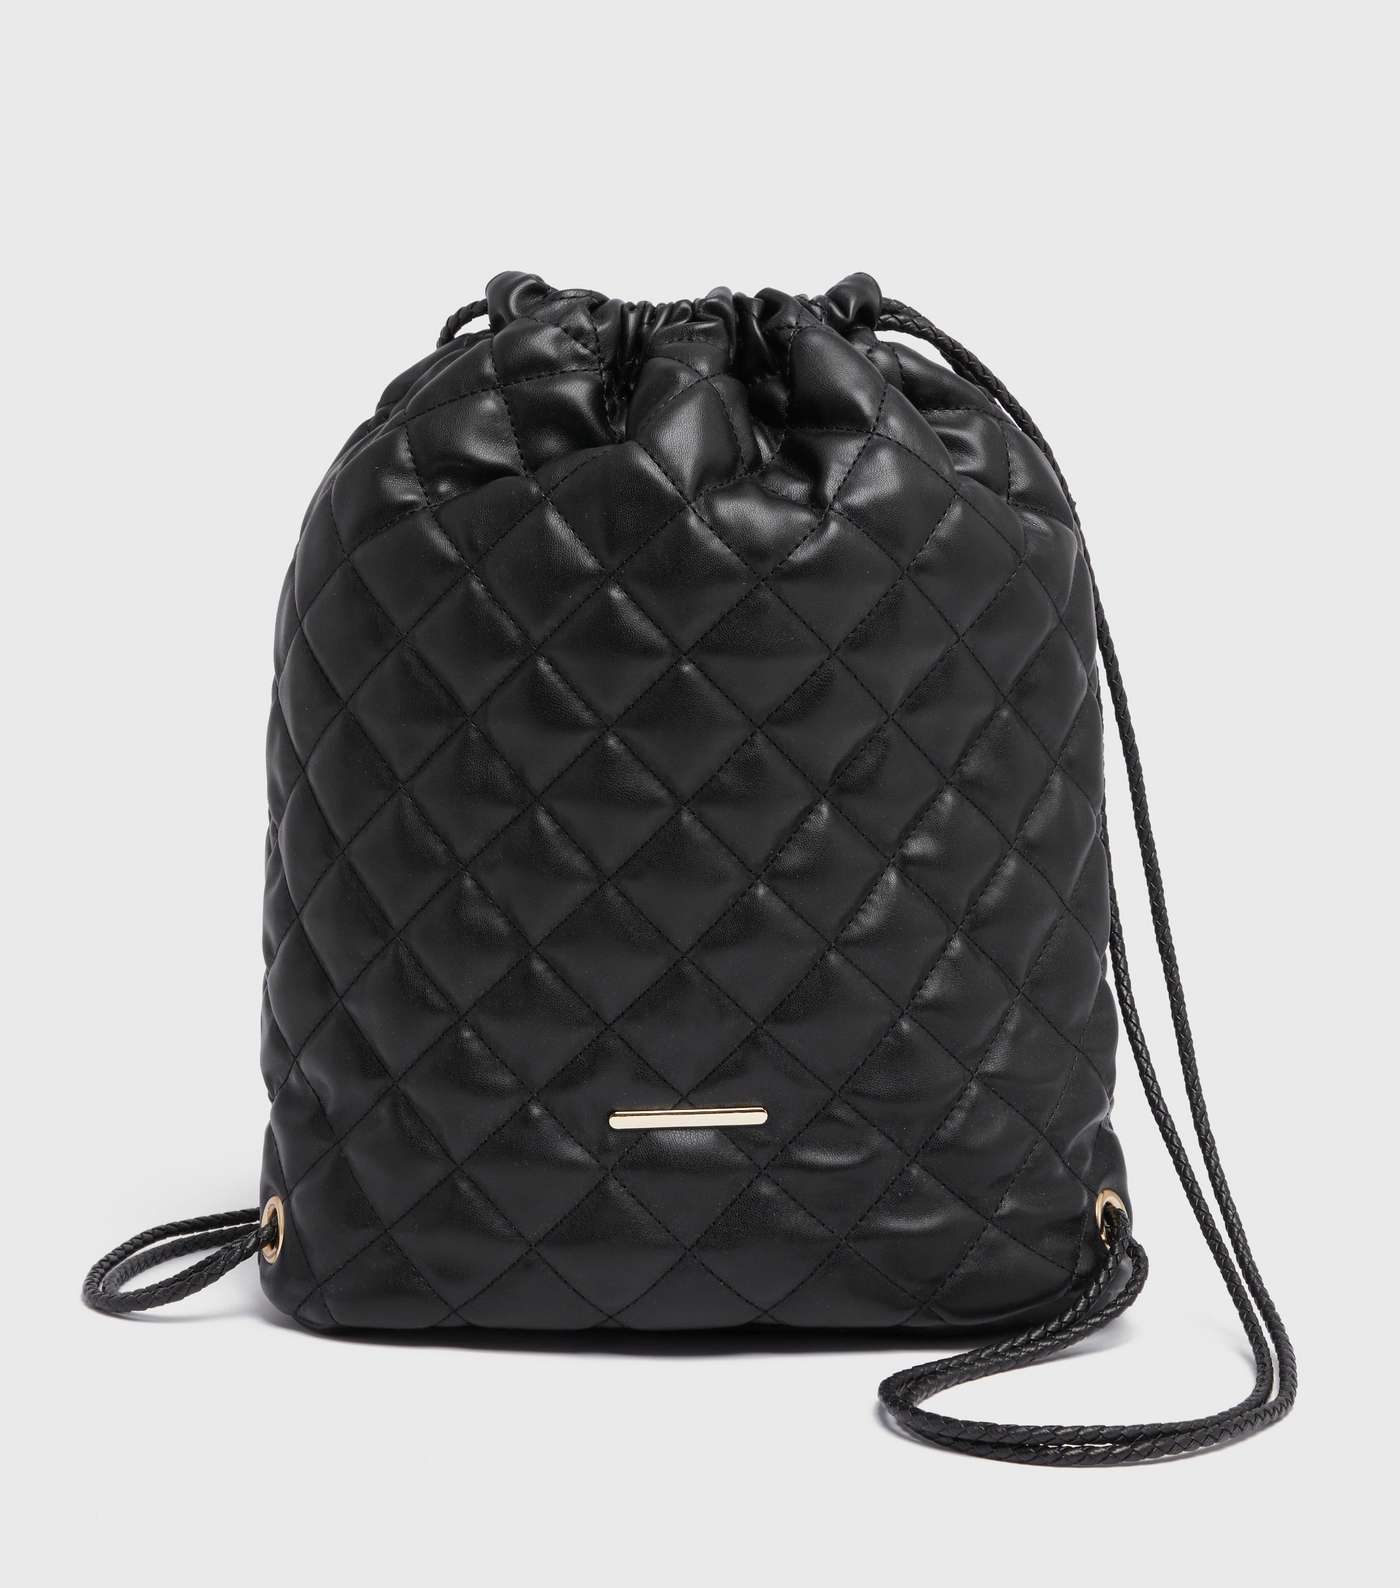 Black Leather-Look Quilted Drawstring Backpack